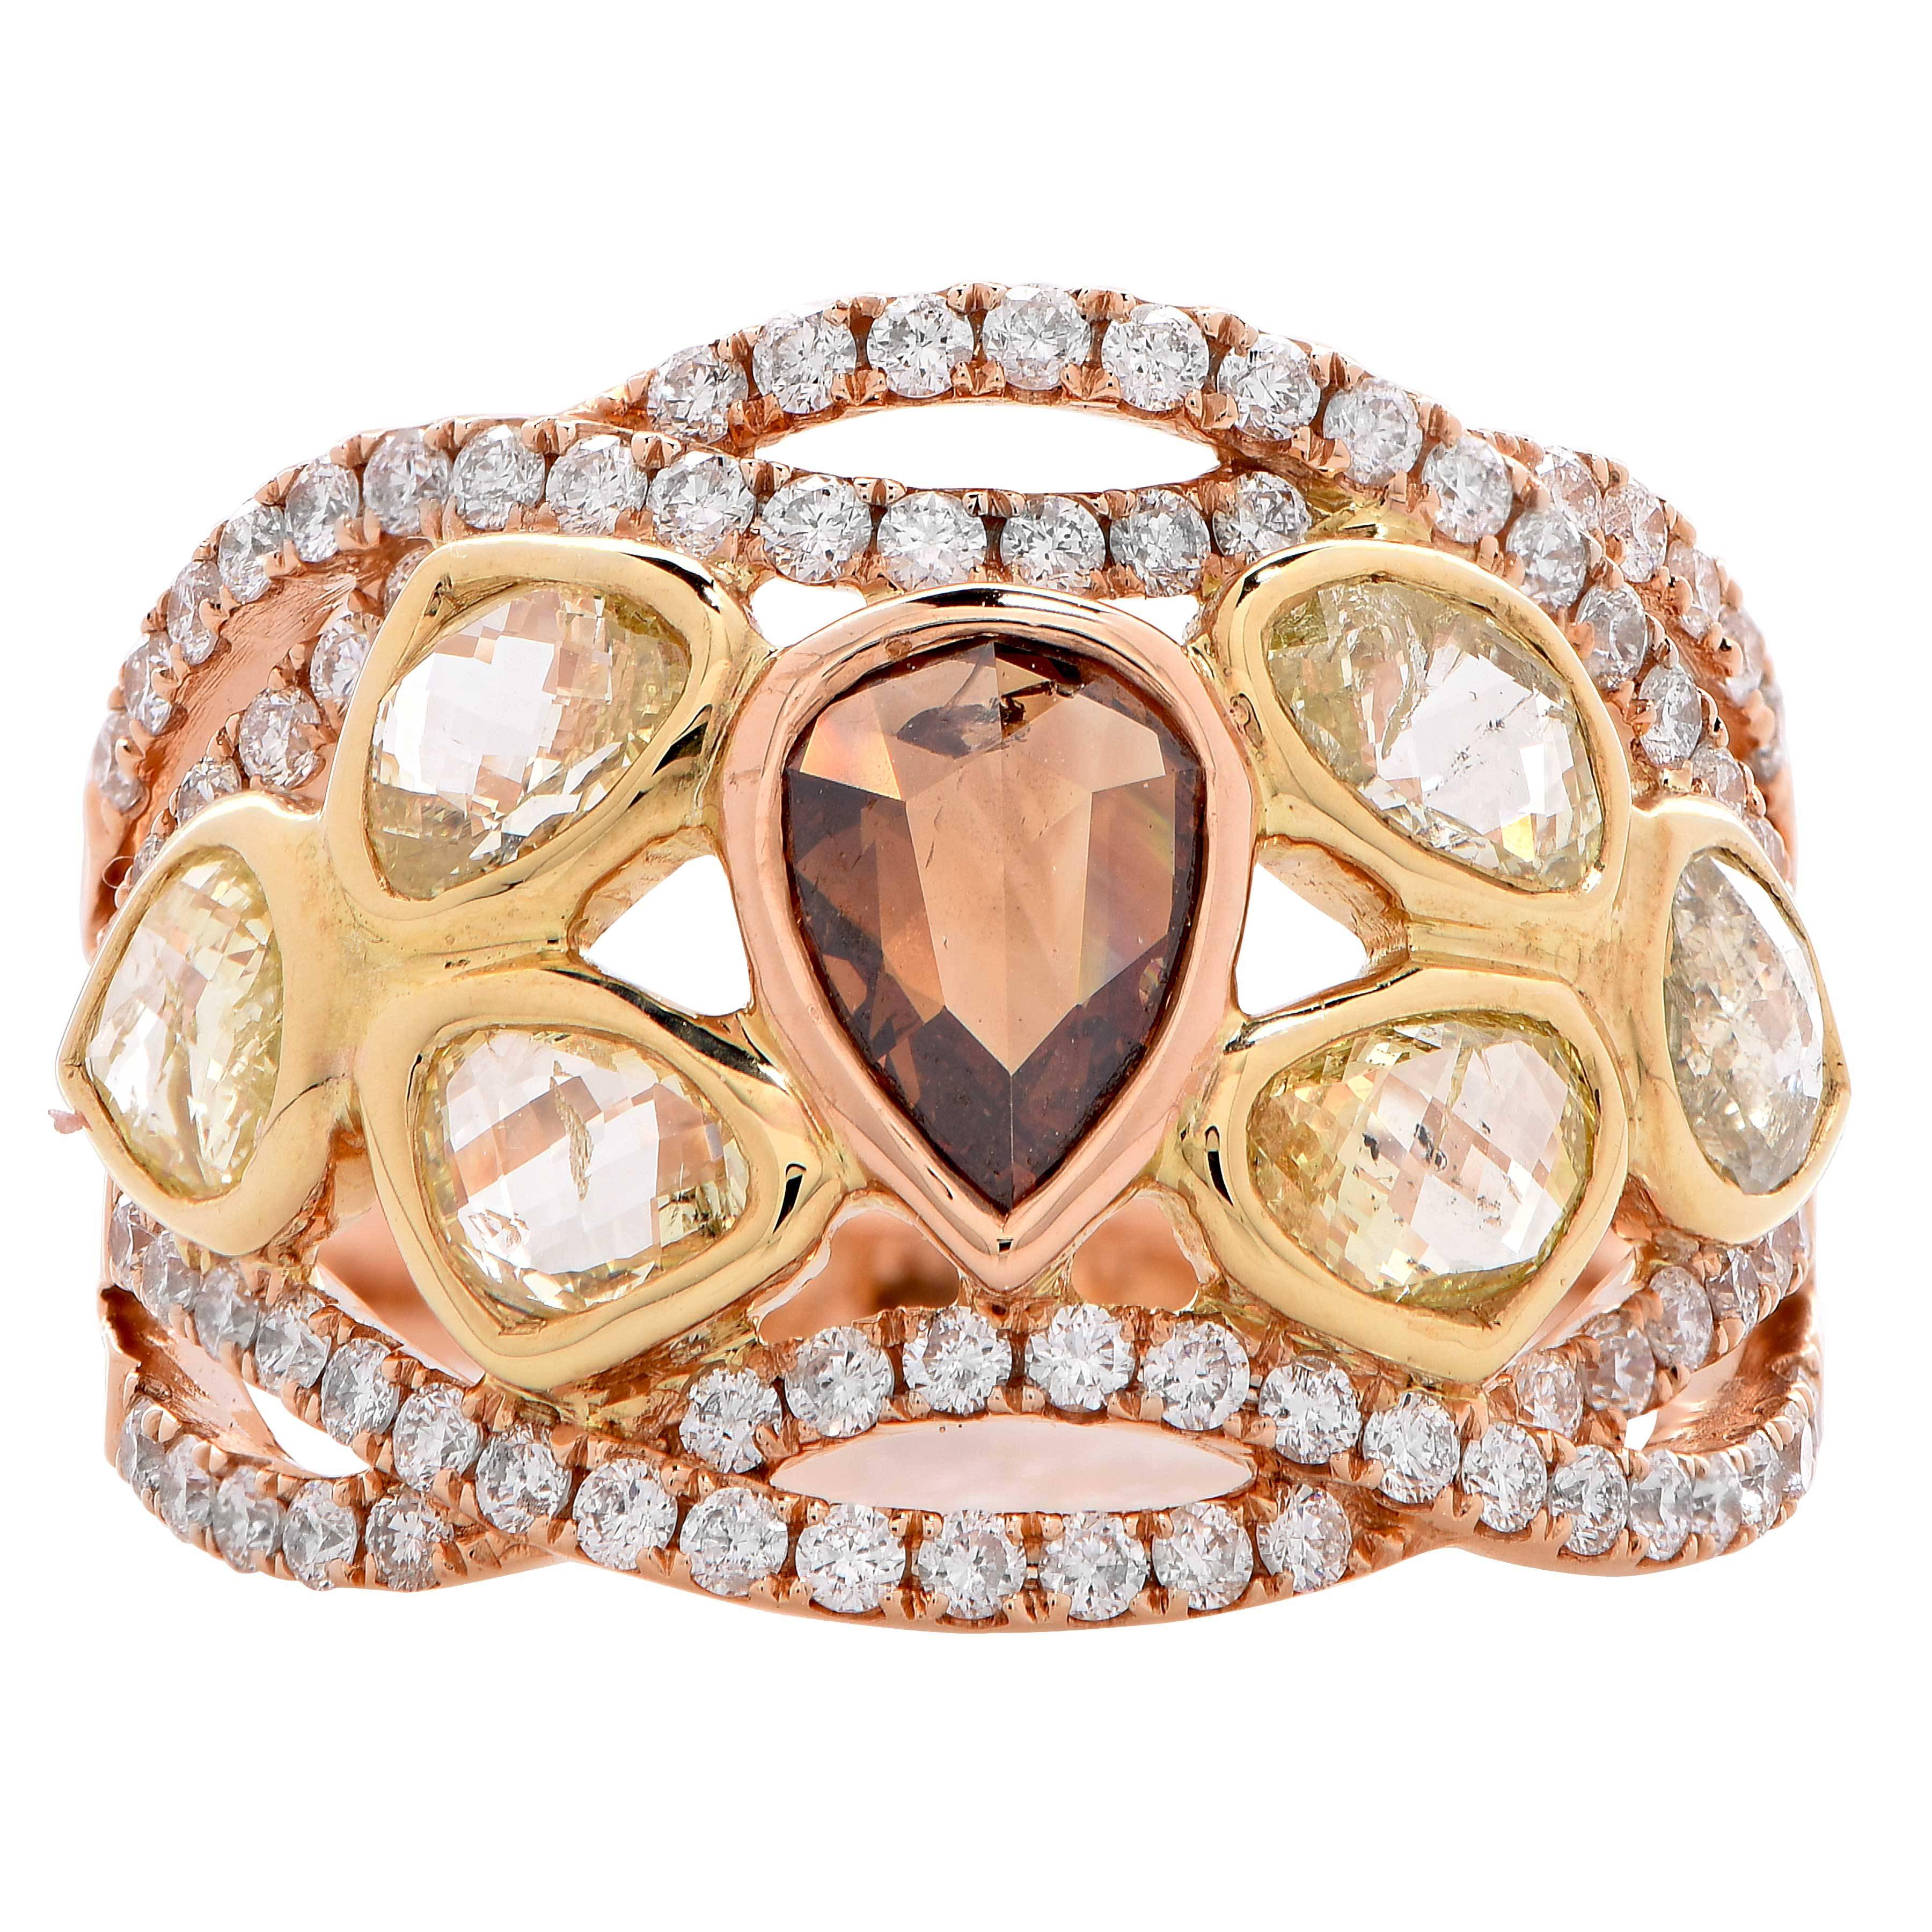 3.08 Carat Fancy Colored Diamond rose gold Ring In Excellent Condition For Sale In Bay Harbor Islands, FL